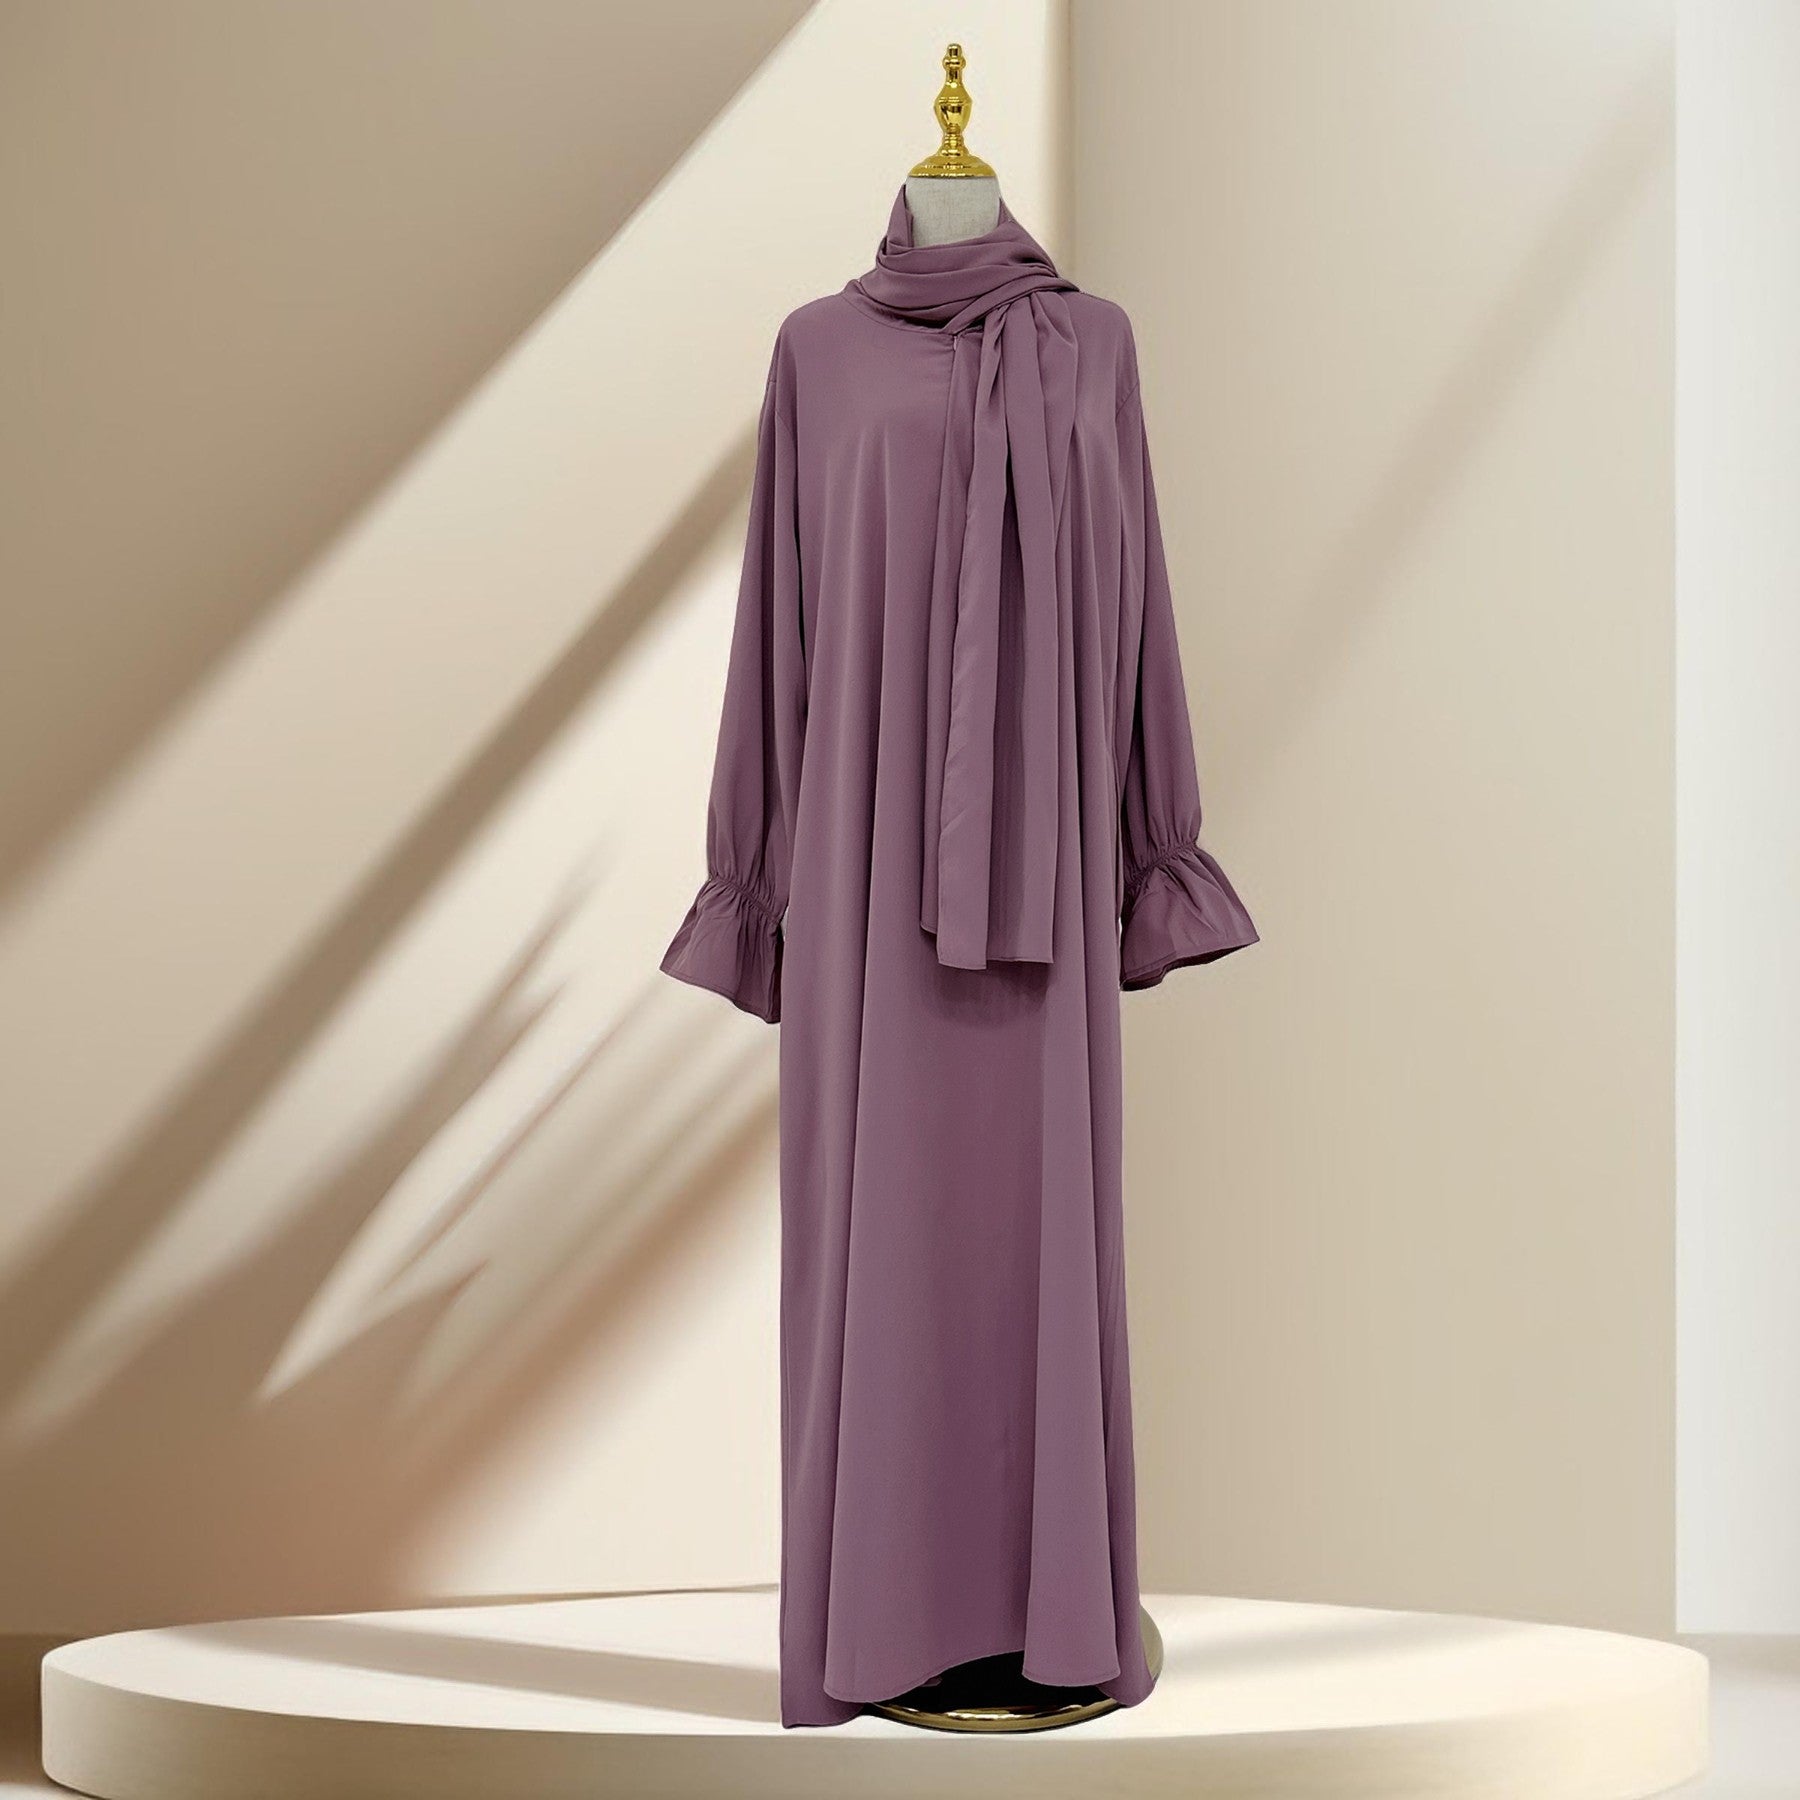 Modest Ease Daily wear abaya with attached hijab - Try Modest Limited 